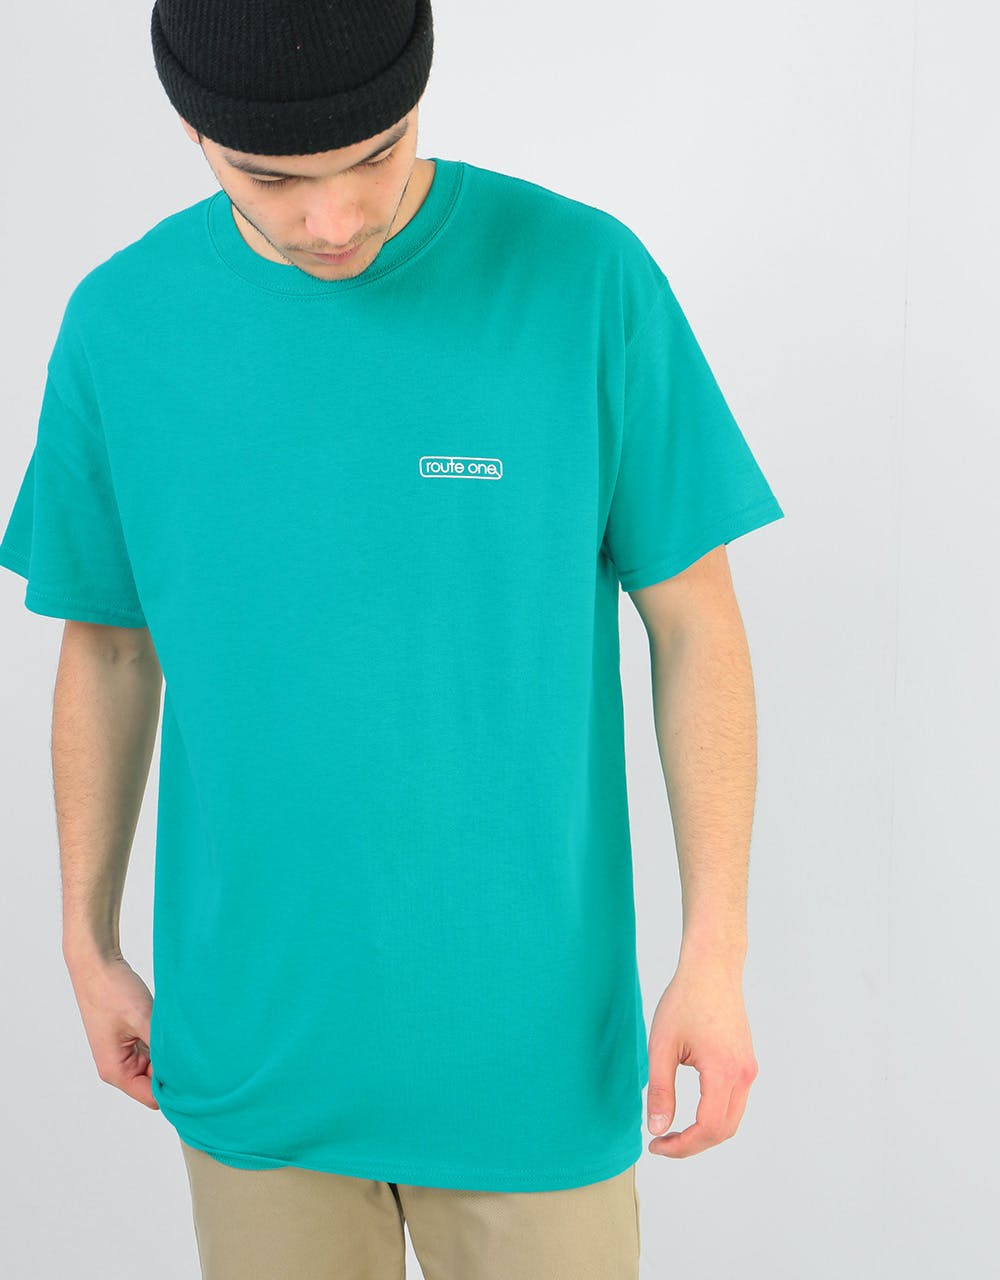 Route One Protection T-Shirt - Jade Dome